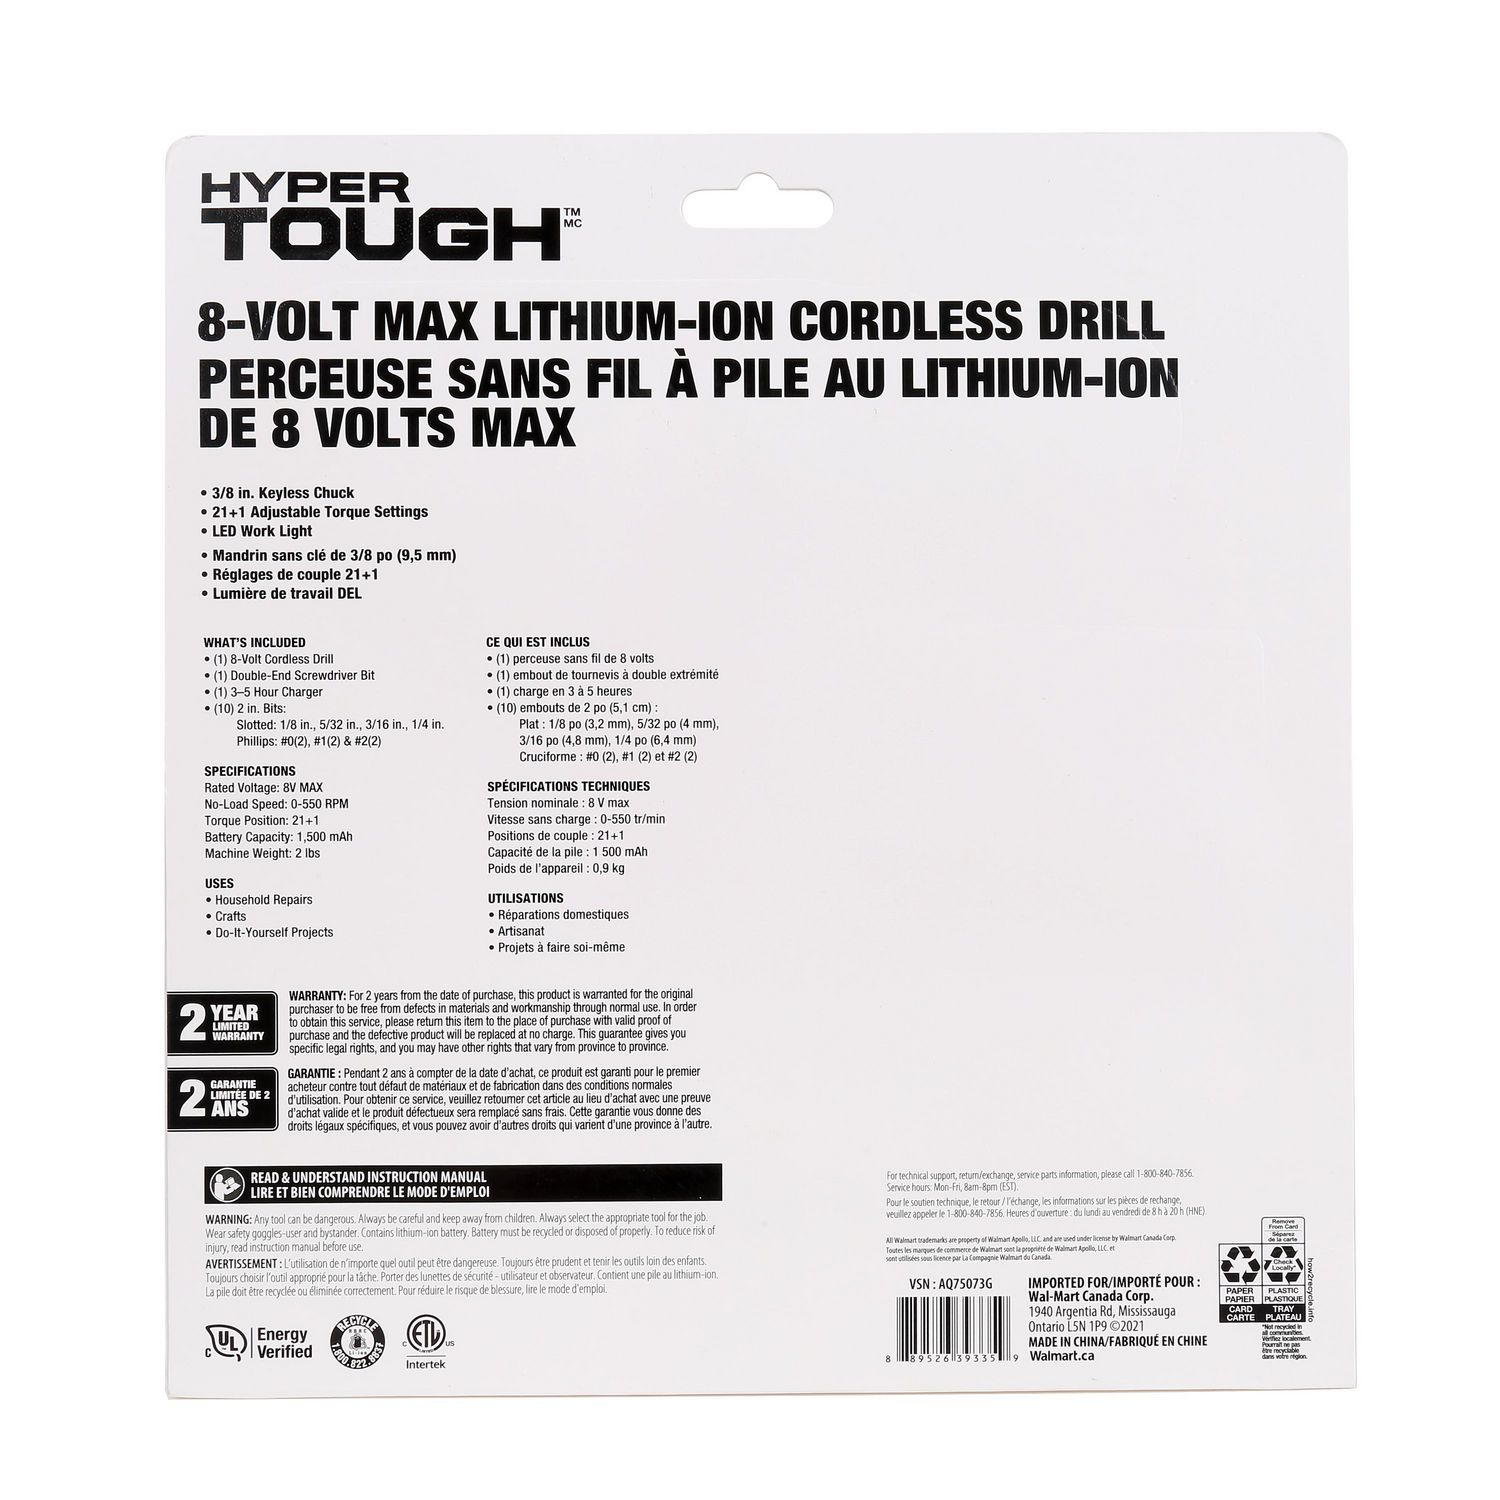 Hyper Tough 8-VOLT MAX LITHIUM-ION CORDLESS DRILL, Rated Voltage: 8V MAX 